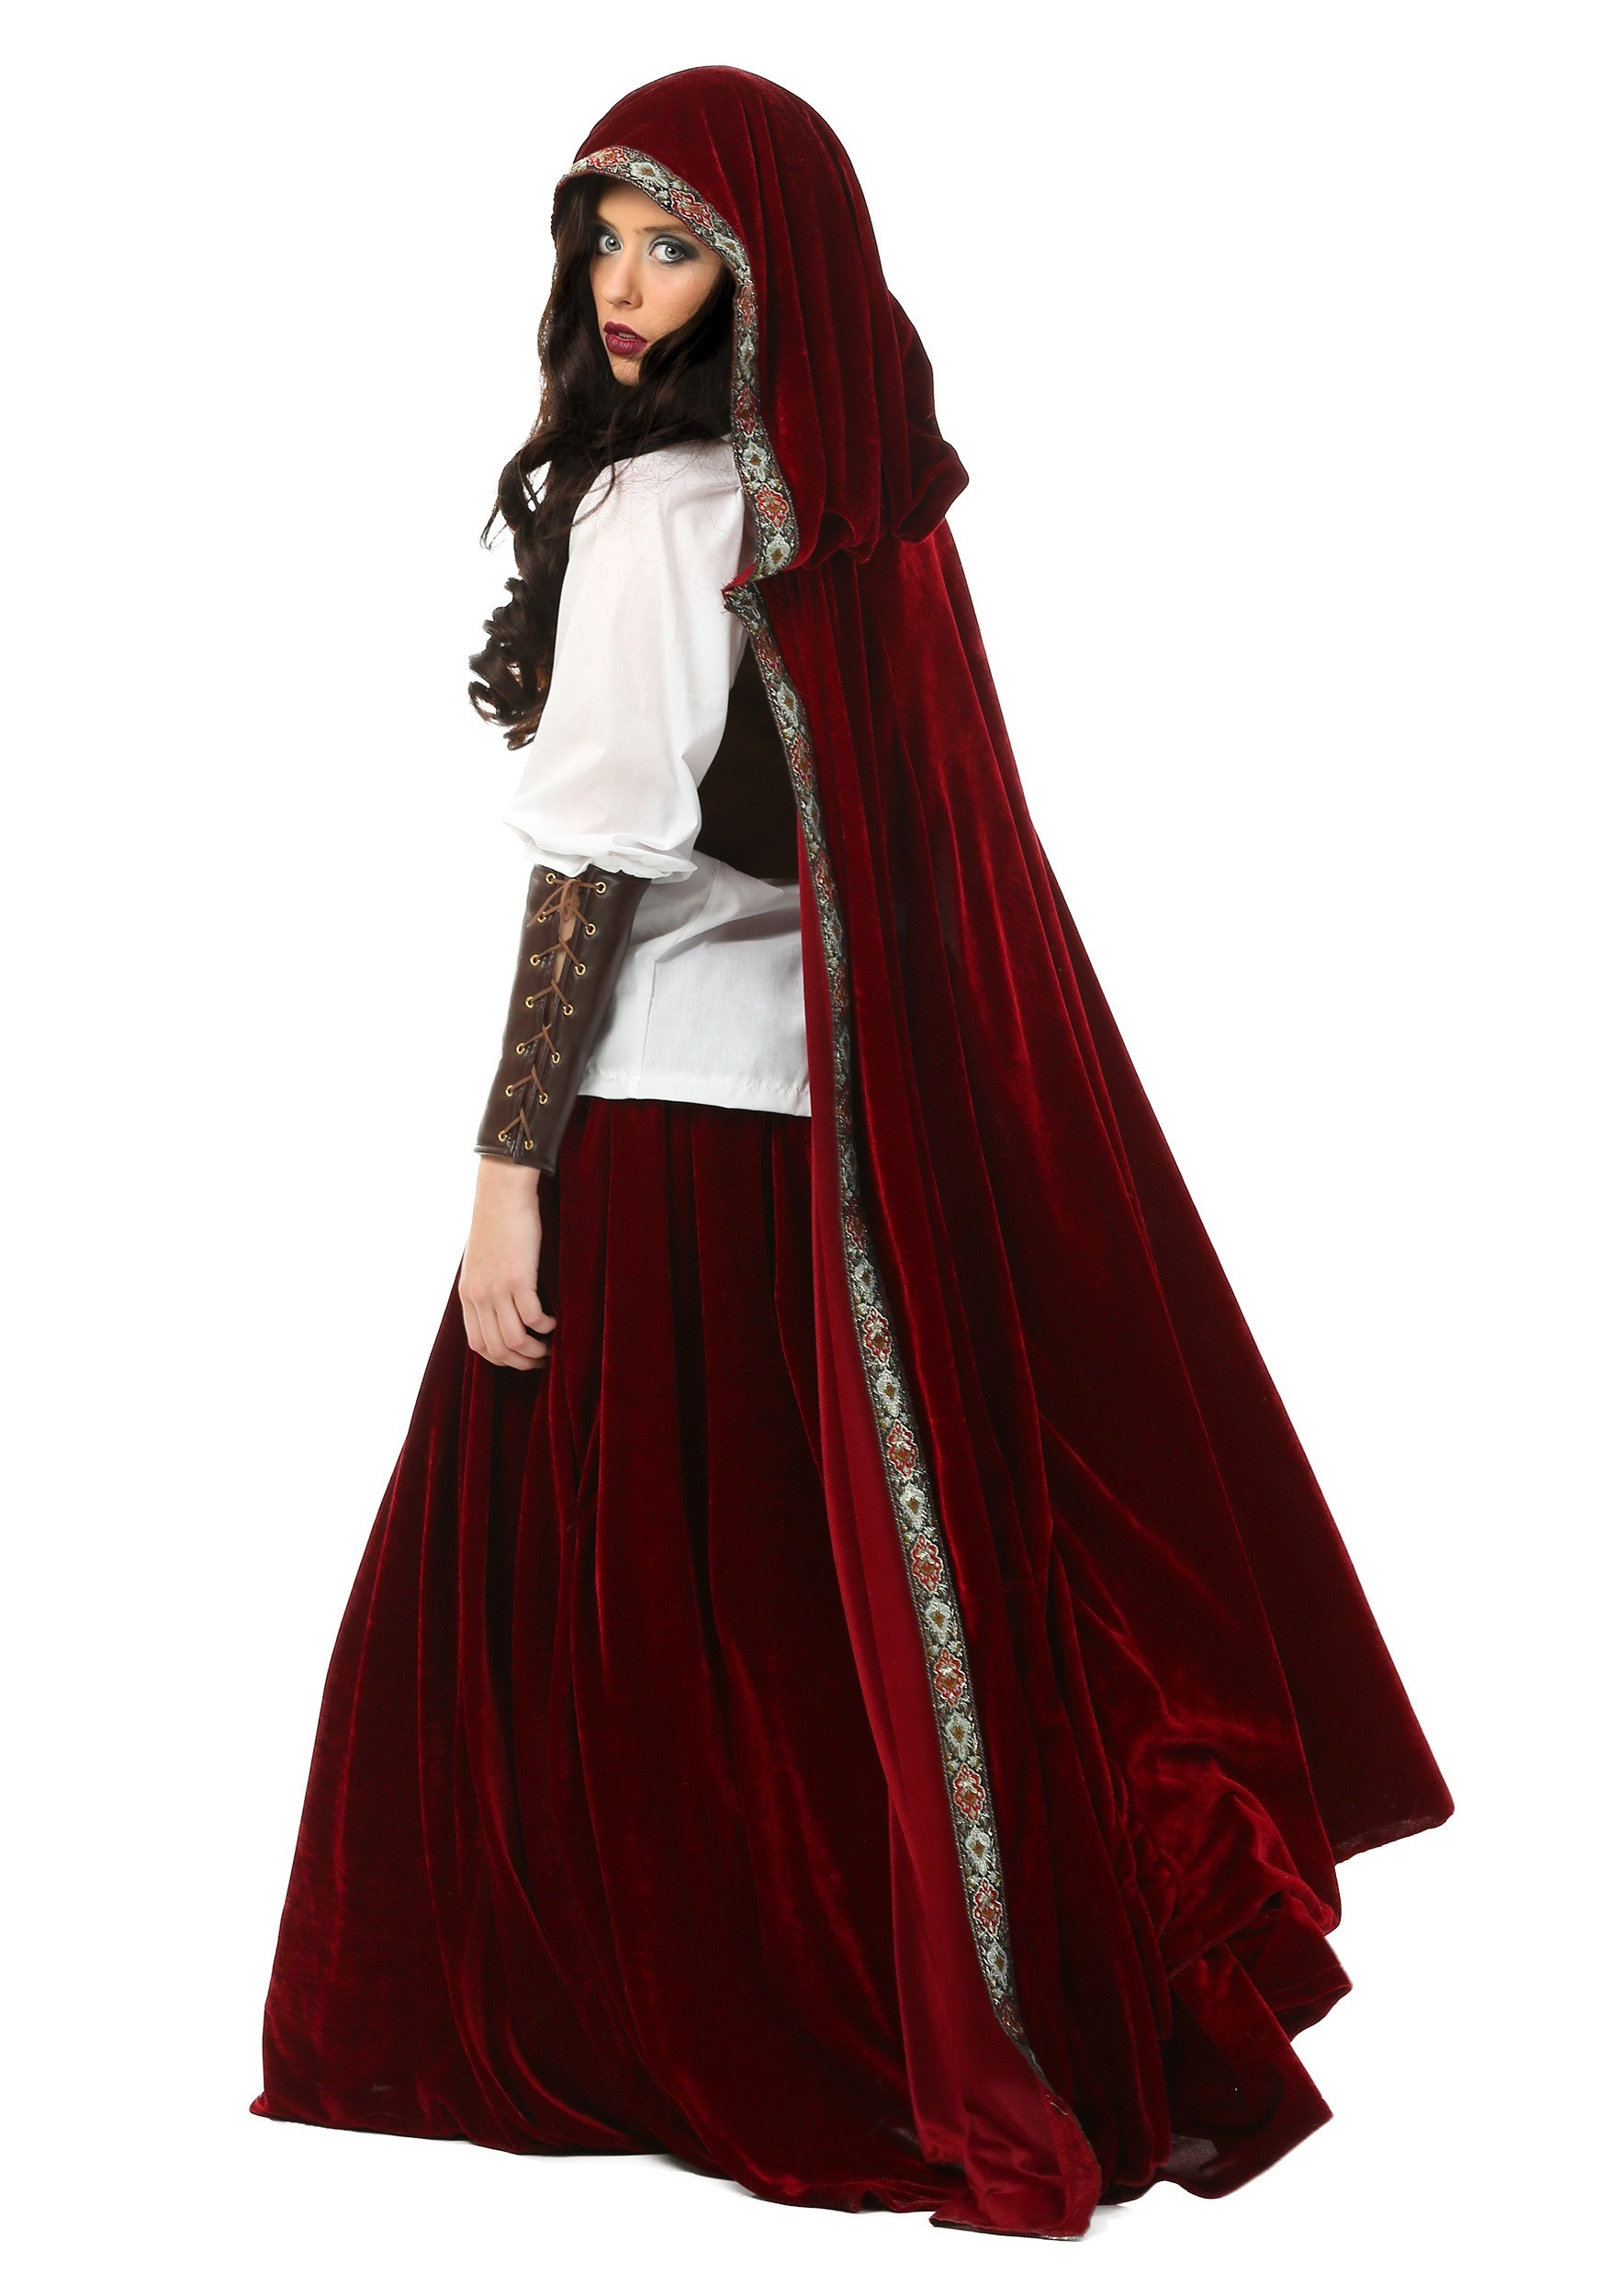 Red Riding Hood DIY Costume
 Deluxe Red Riding Hood Costume